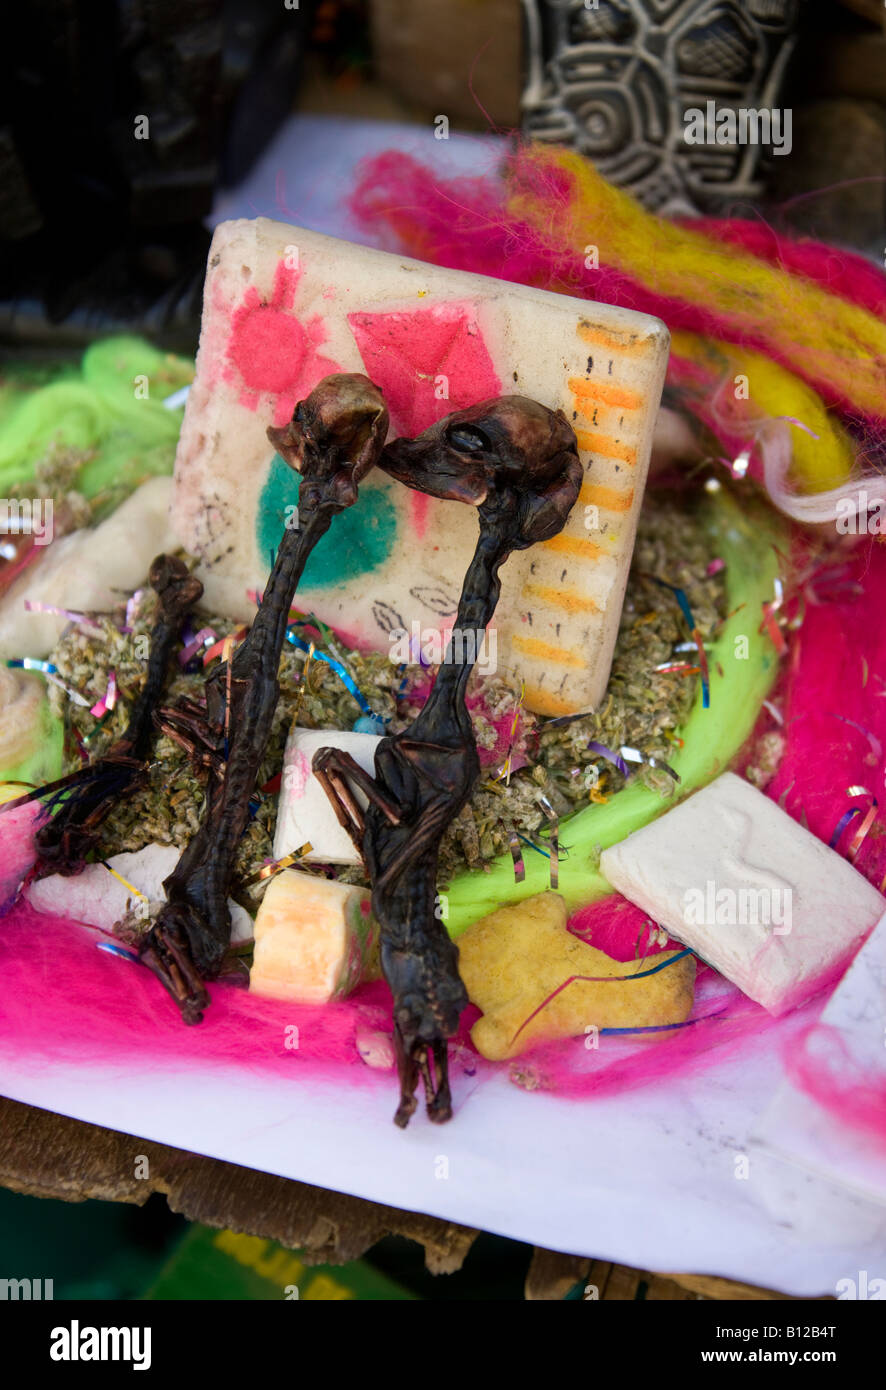 Aborted Llama fetus at the Witches Market in La Paz in Bolivia. Stock Photo